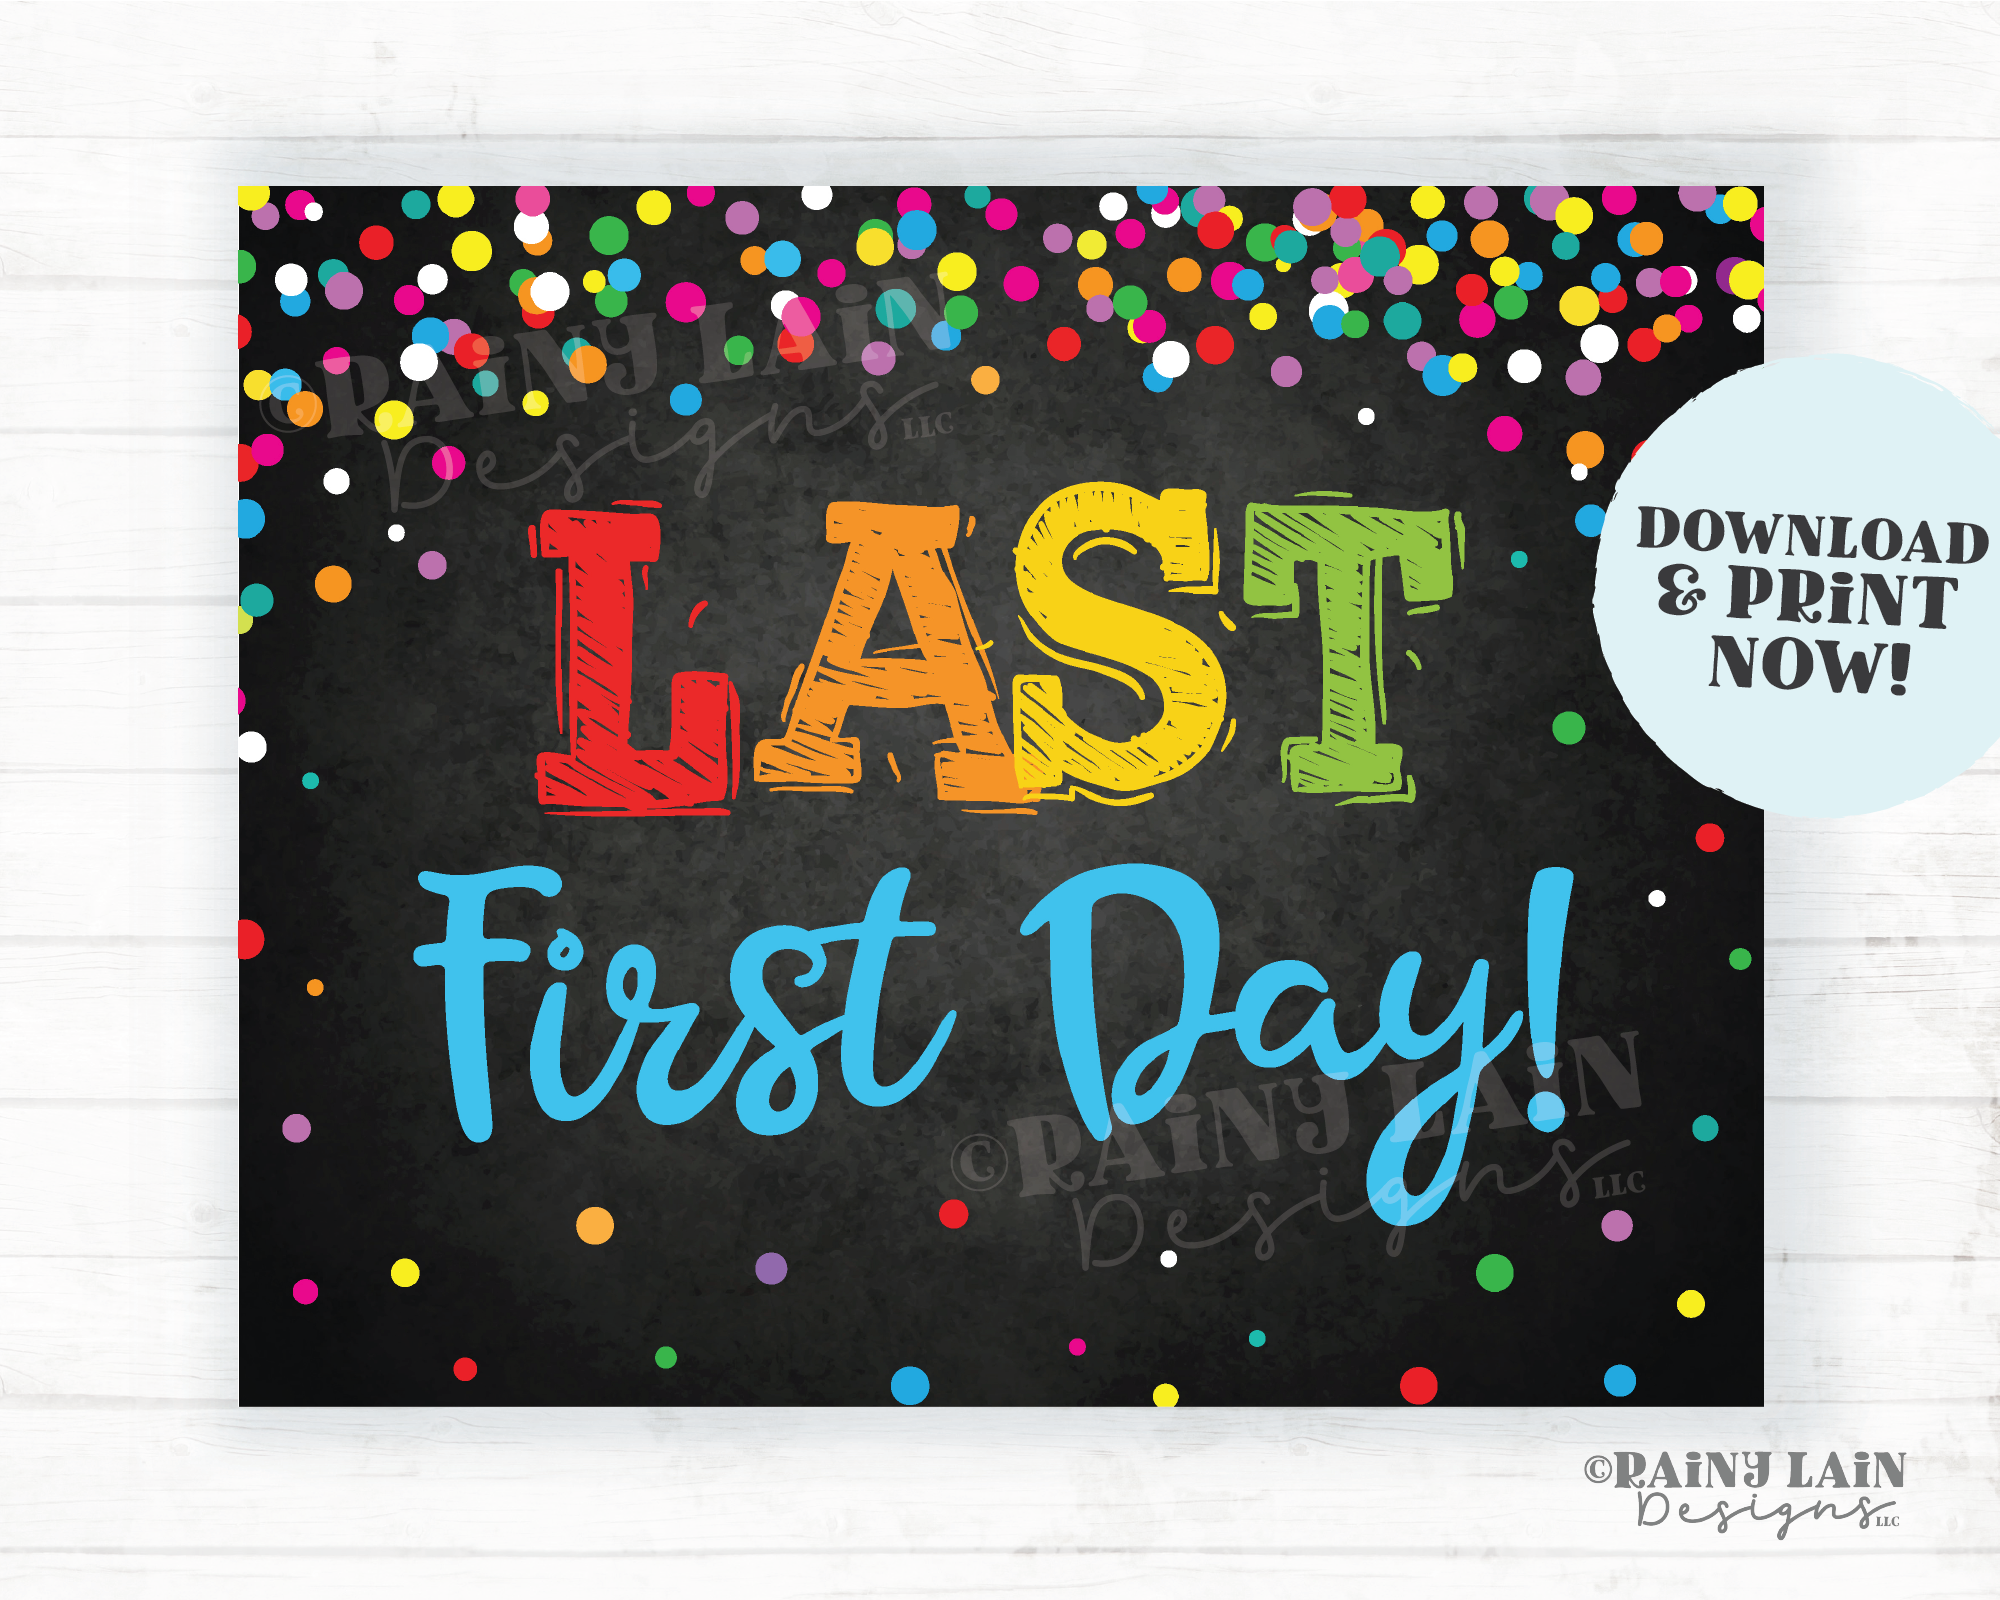 Last First day of school Sign 1st day of Senior Year 12th grade Back to School Picture Photo Prop Printable Chalkboard Confetti